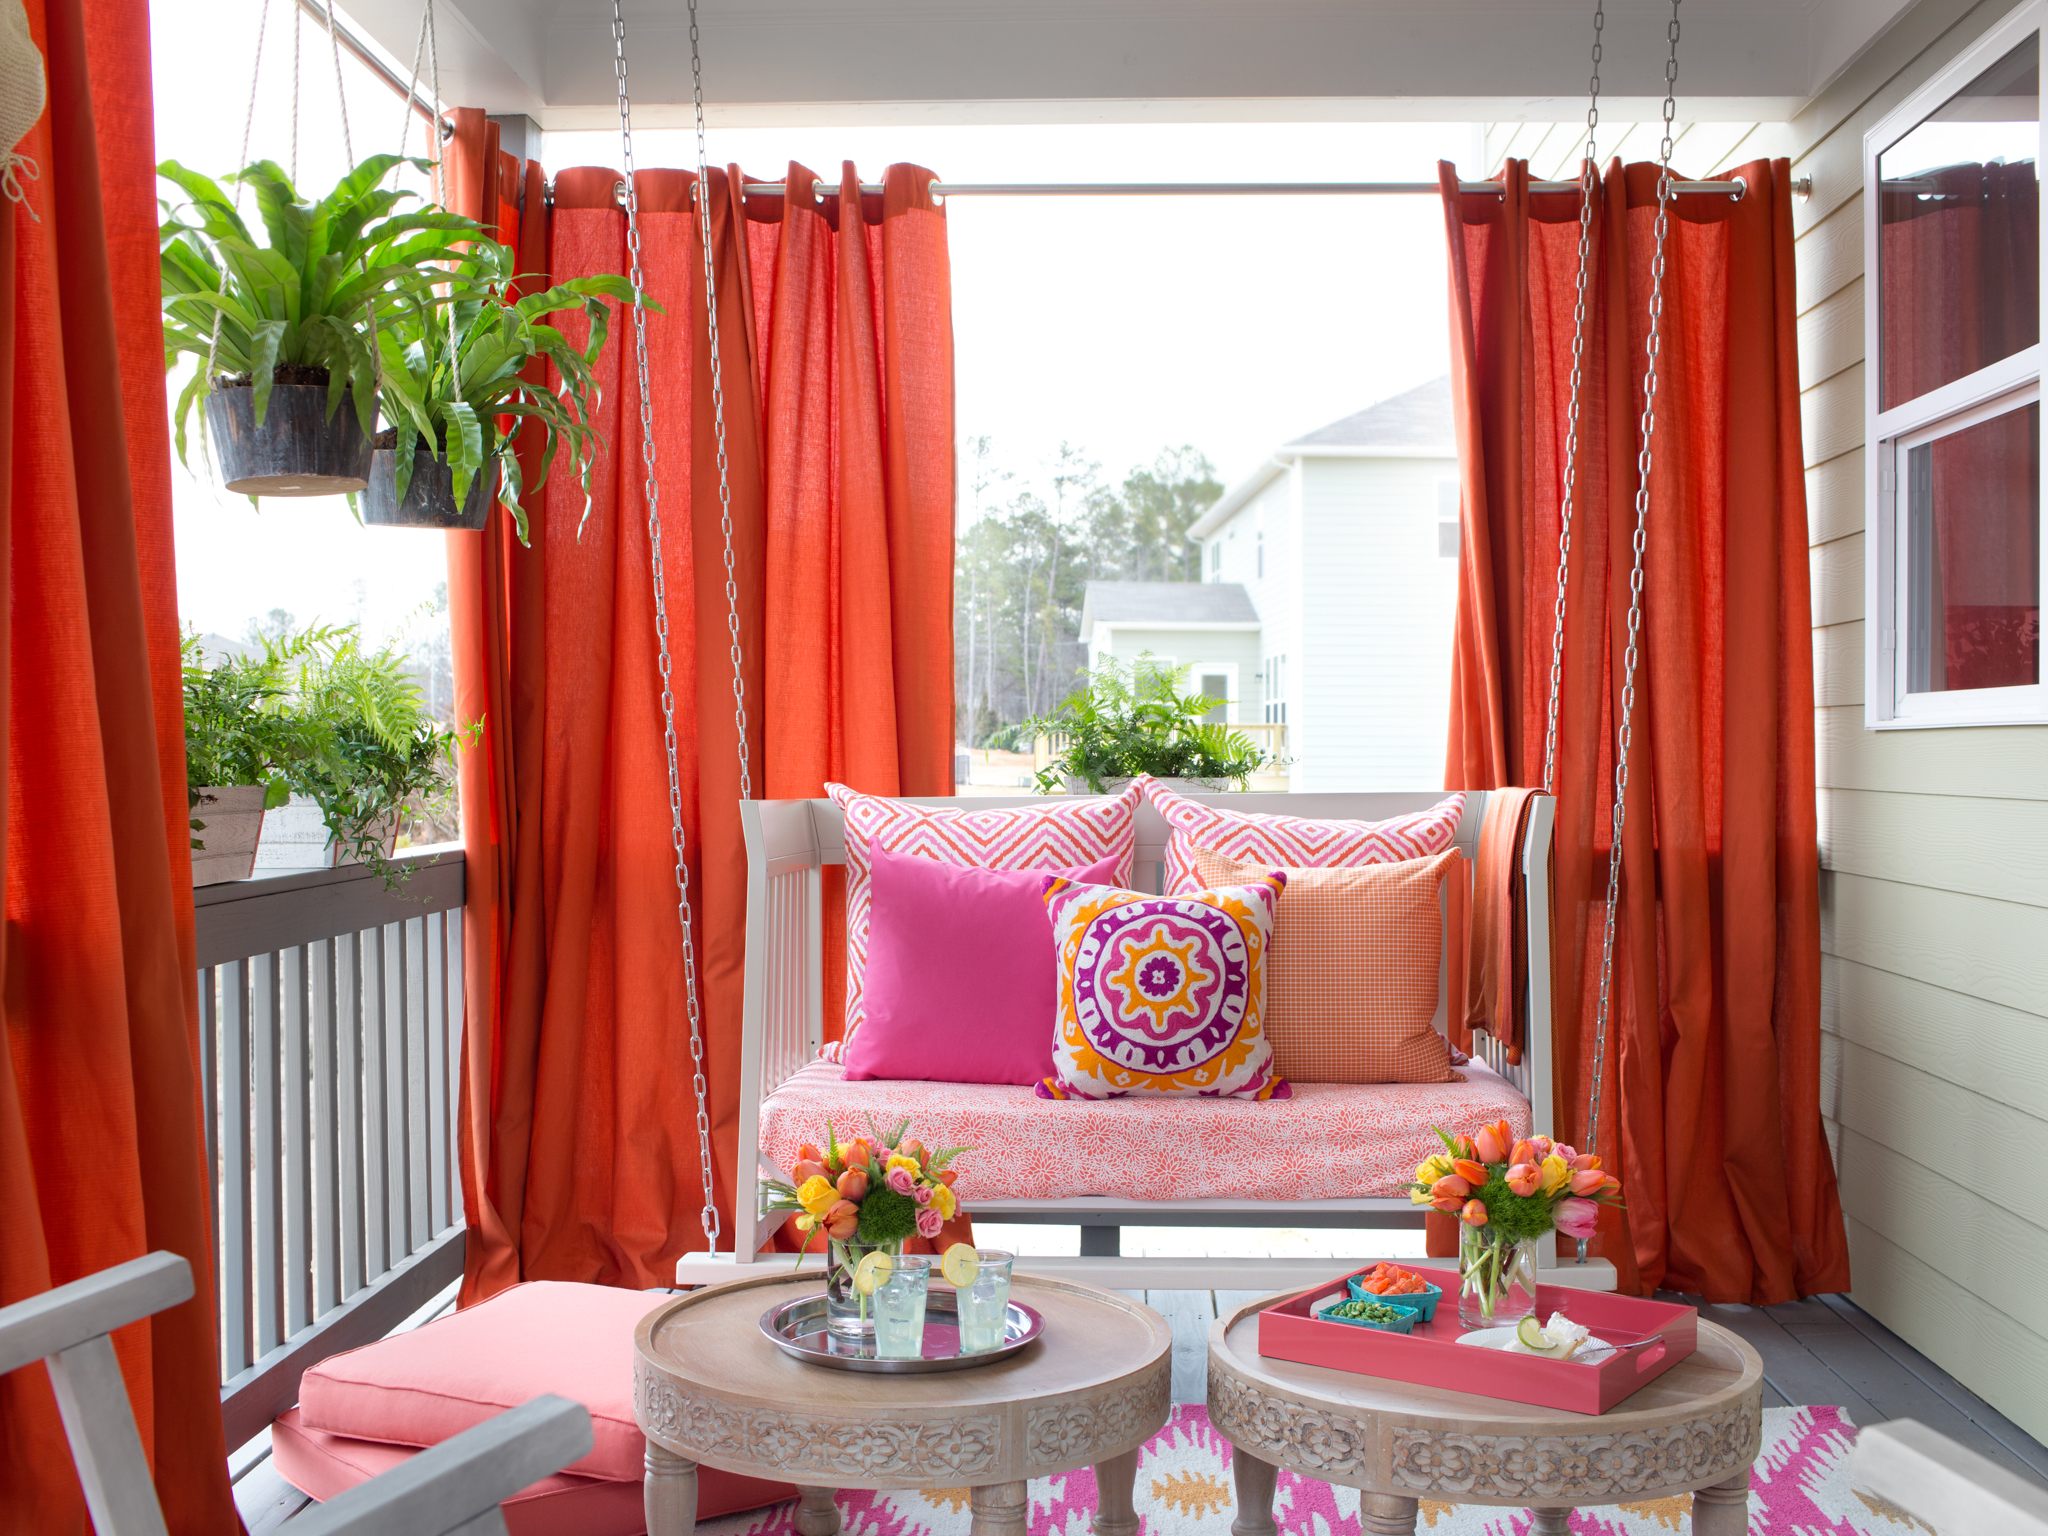 Vibrant Outdoor Space With Hanging Daybed and Draperies